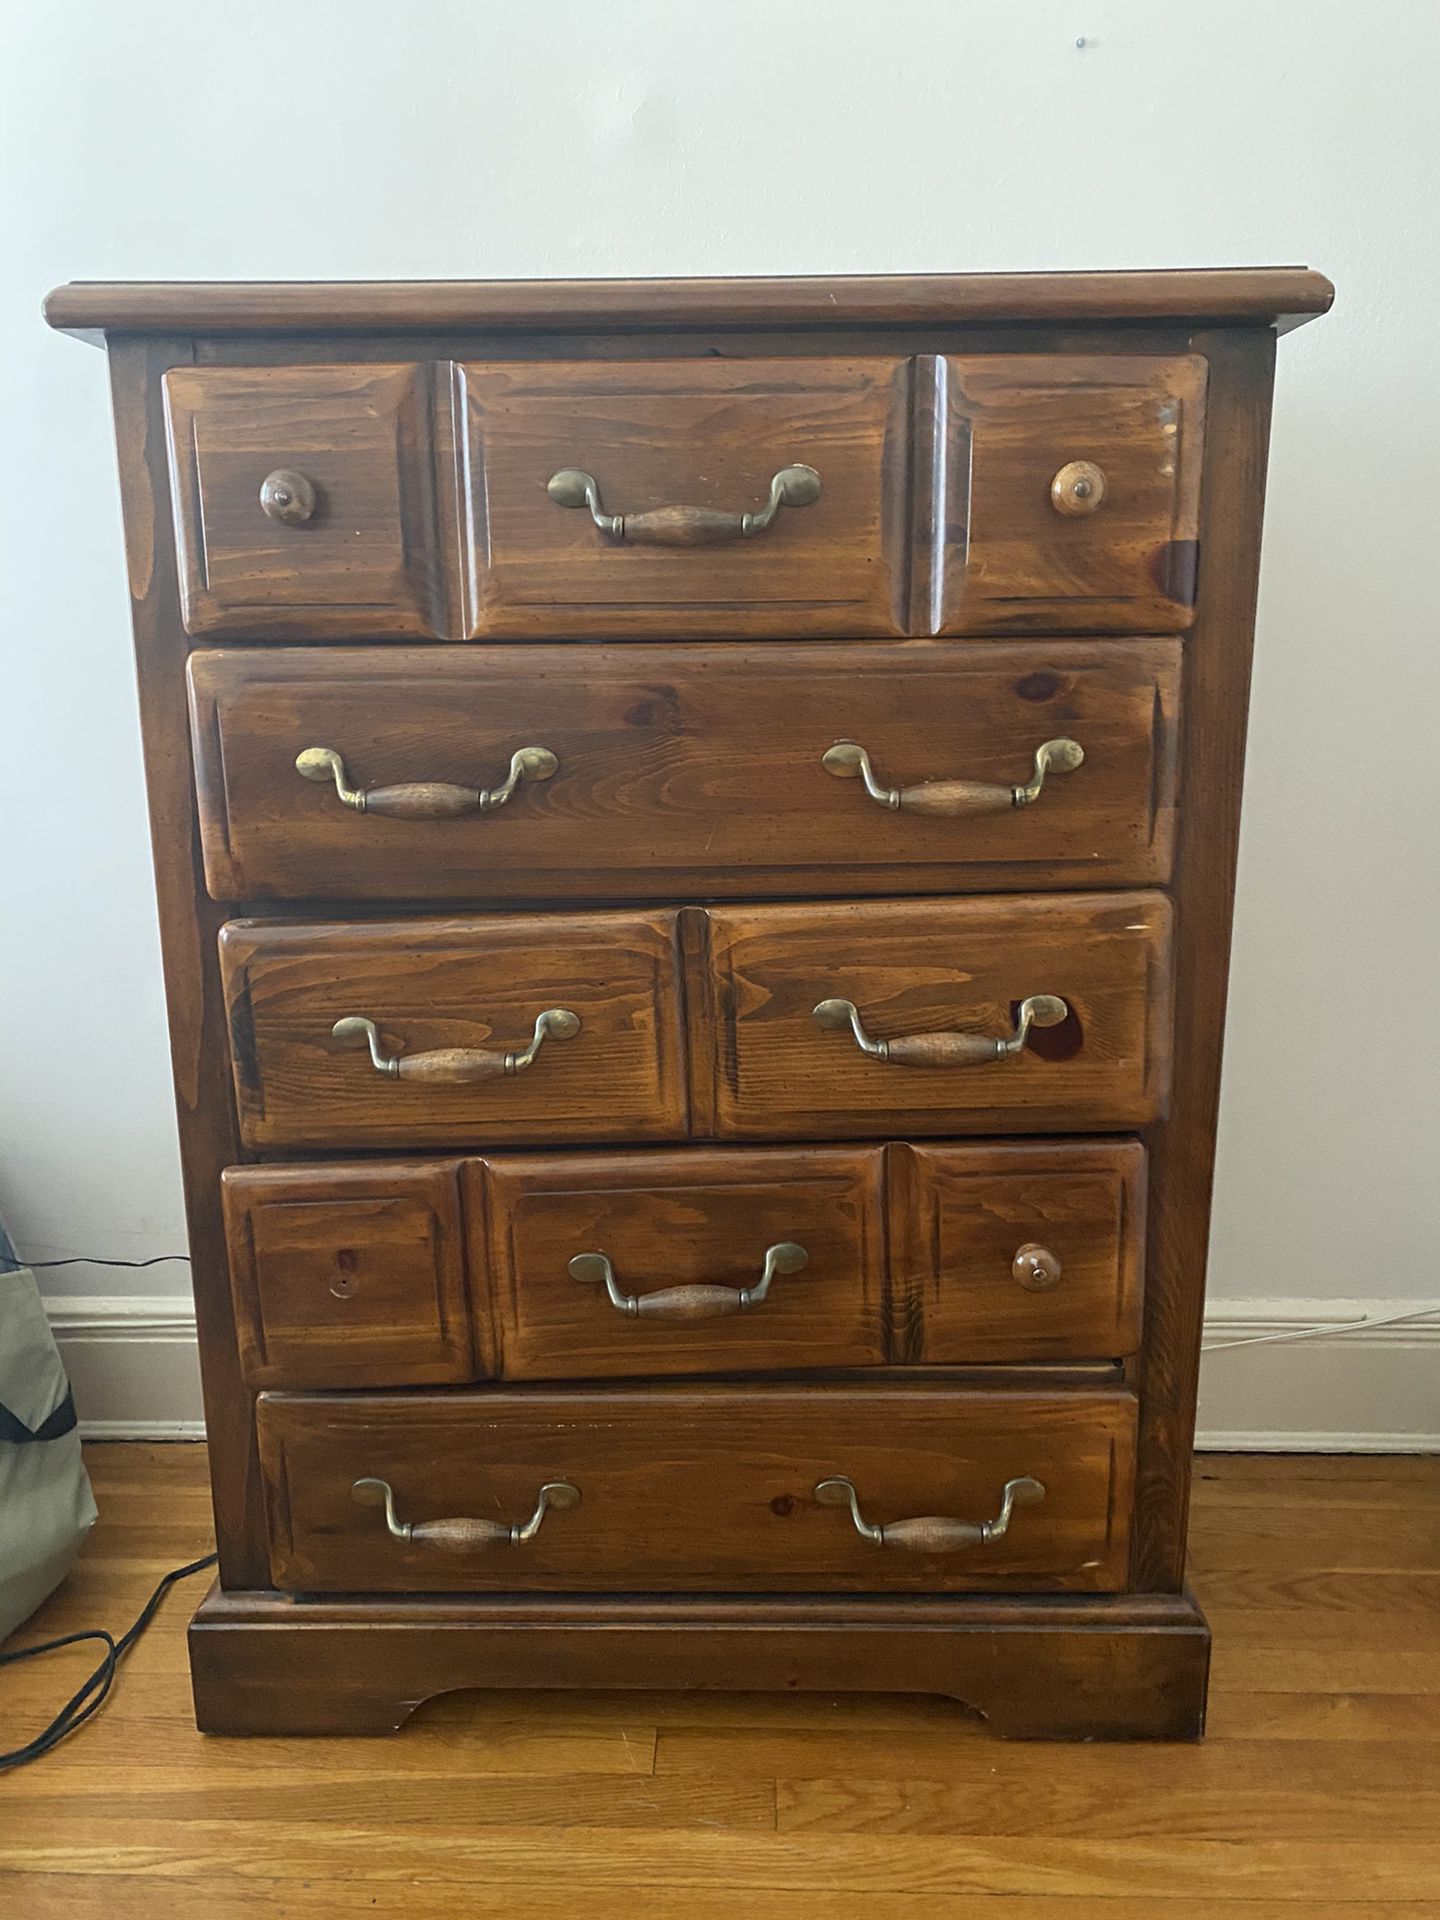 Dressers for free